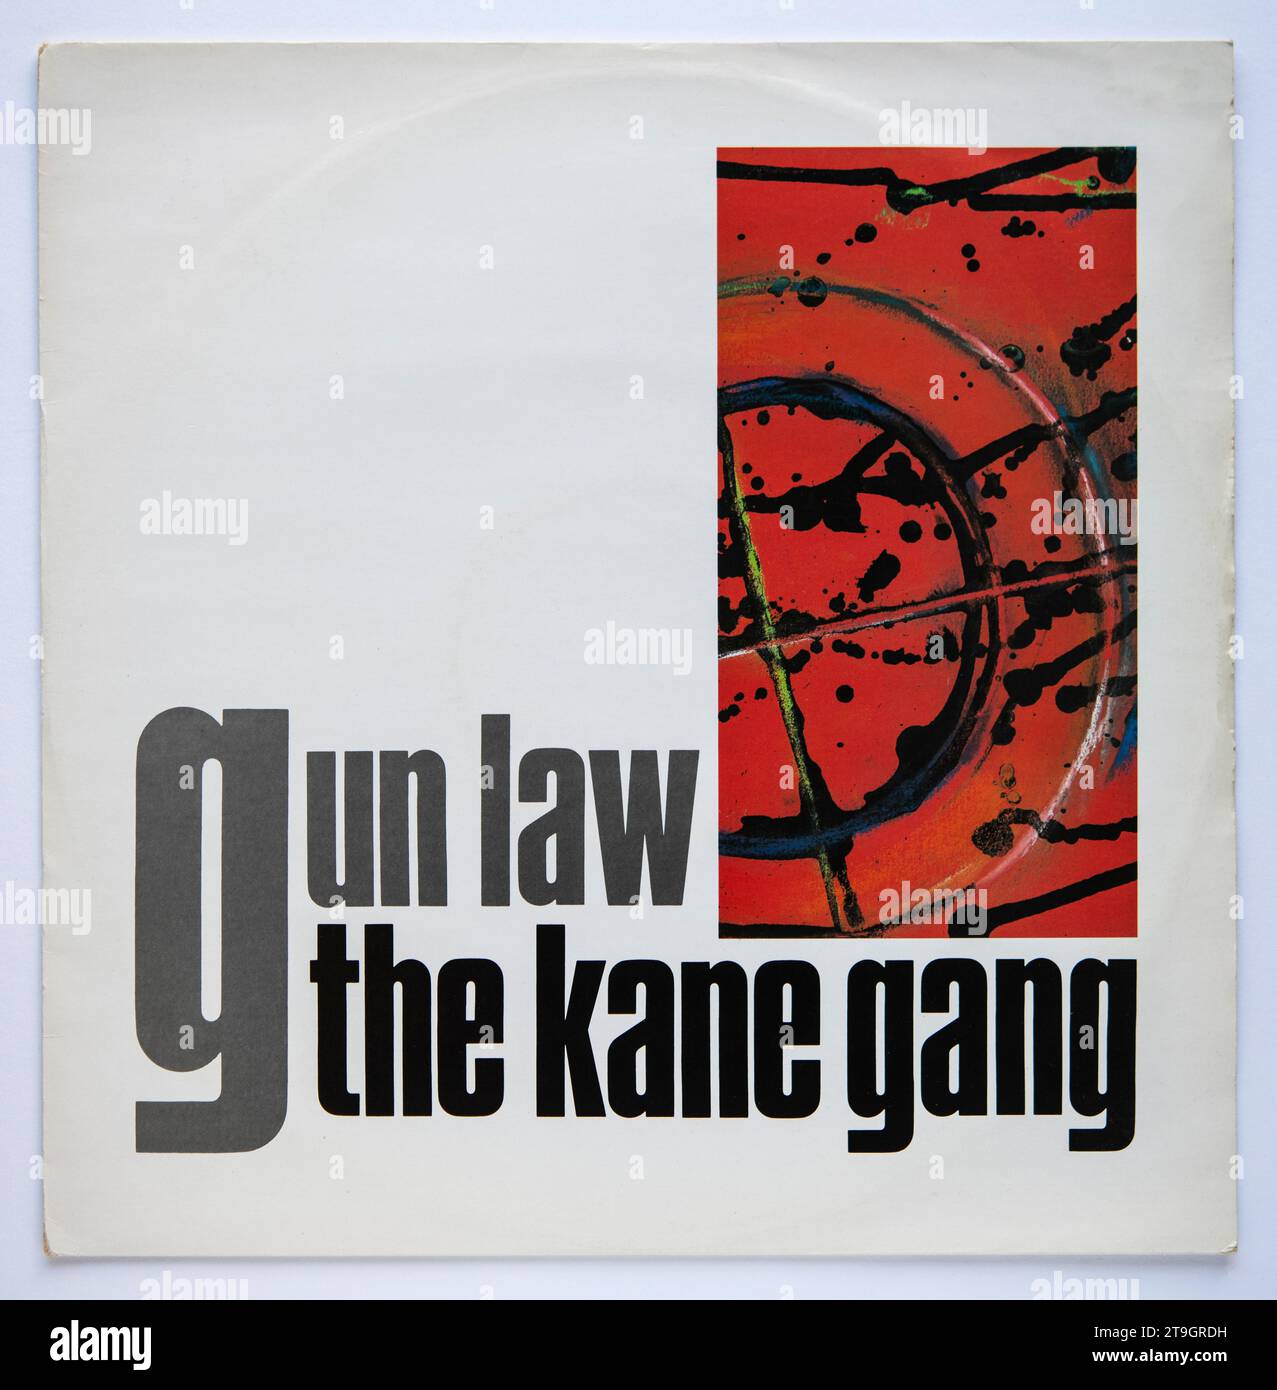 Picture cover of the 12 inch single version of Gun Law by The Kane Gang, which was released in 1985 Stock Photo